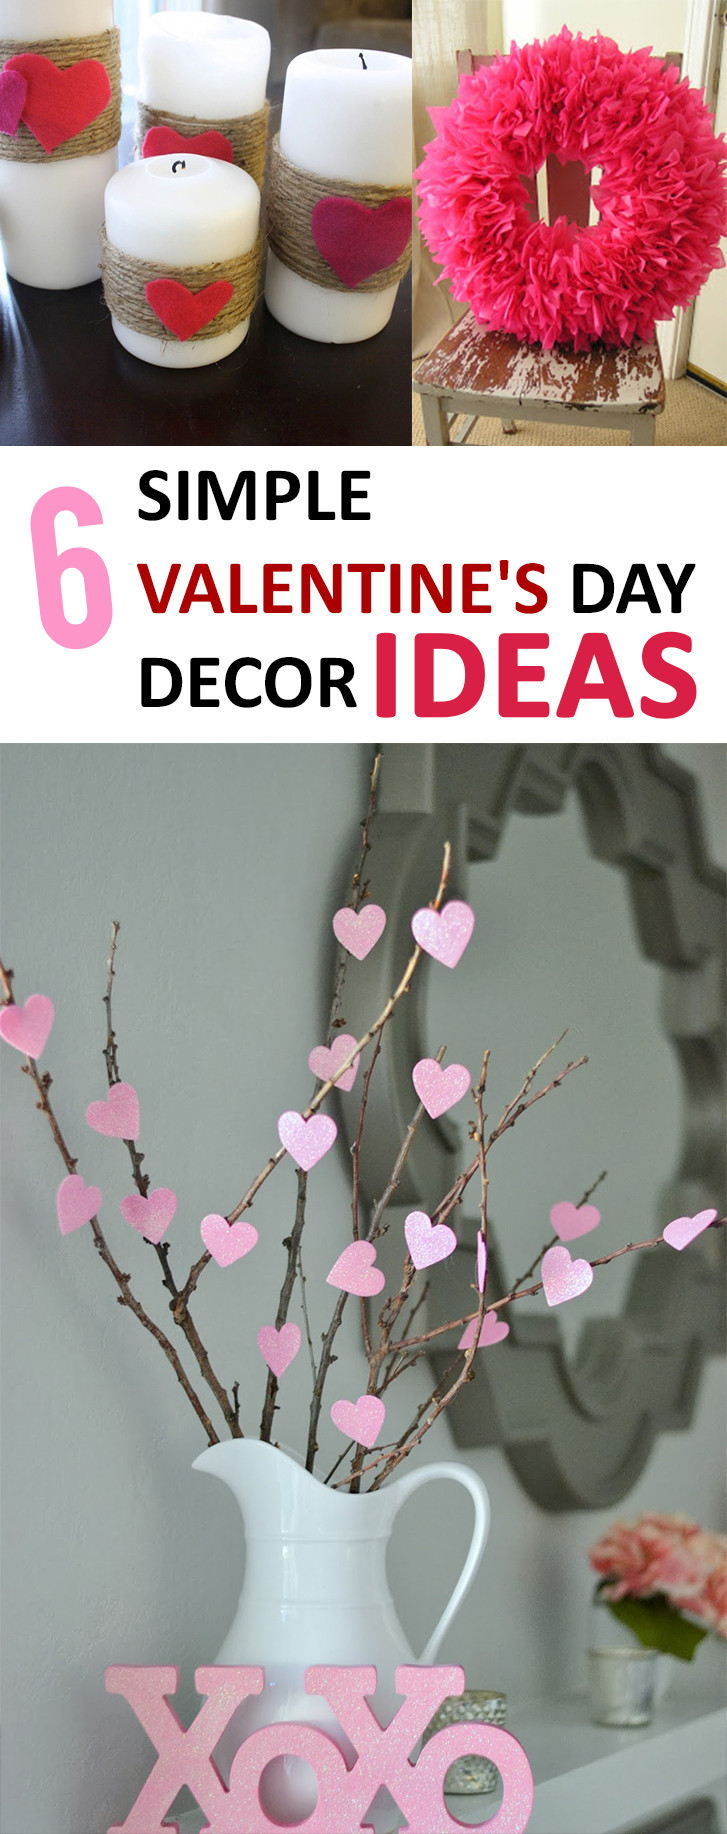 At Home Valentines Day Ideas
 6 Simple Valentine’s Day Décor Ideas – Sunlit Spaces